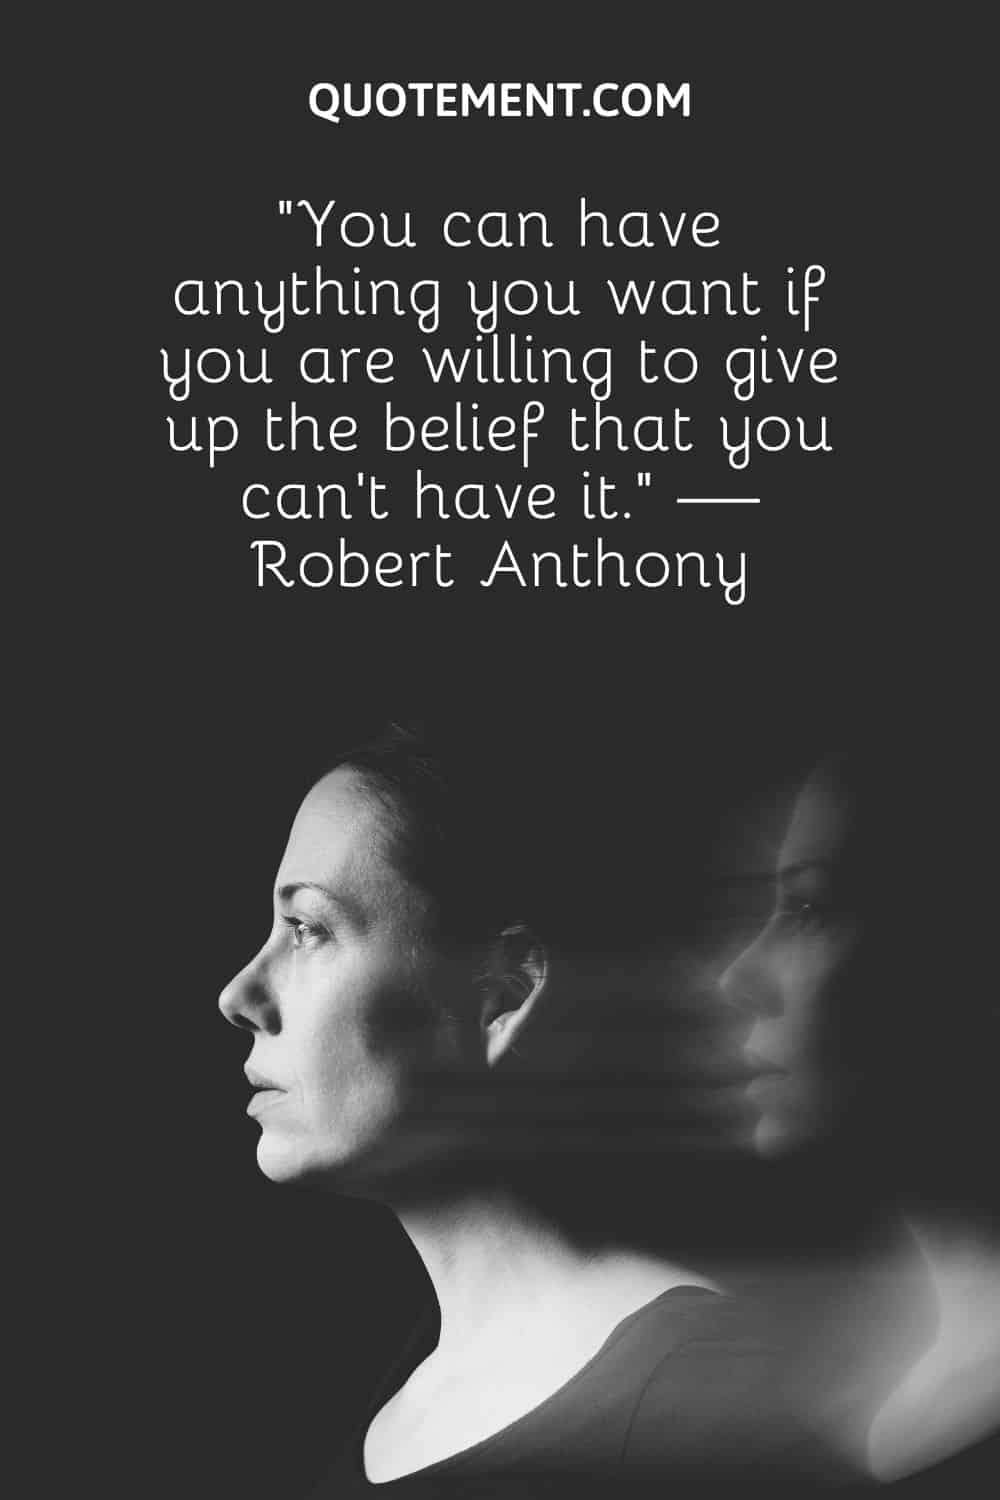 You can have anything you want if you are willing to give up the belief that you can't have it. ­— Robert Anthony